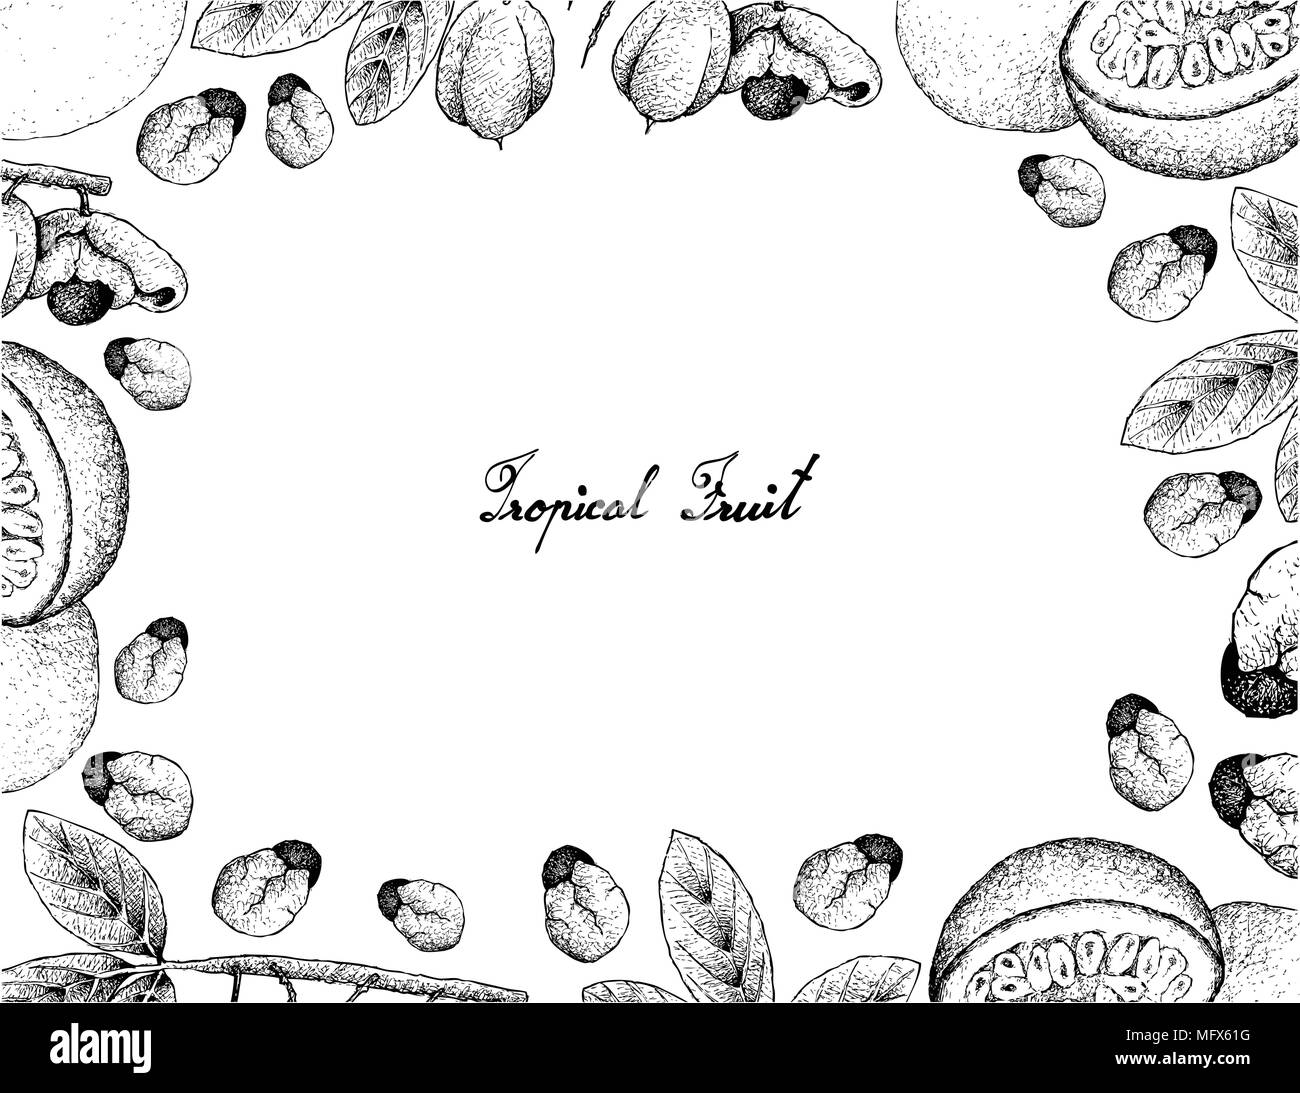 Tropical Fruits, Illustration Frame of Hand Drawn Sketch of Passion Fruit or Passiflora Edulis and Ackee or Blighia Sapida Fruits Isolated on A White  Stock Vector